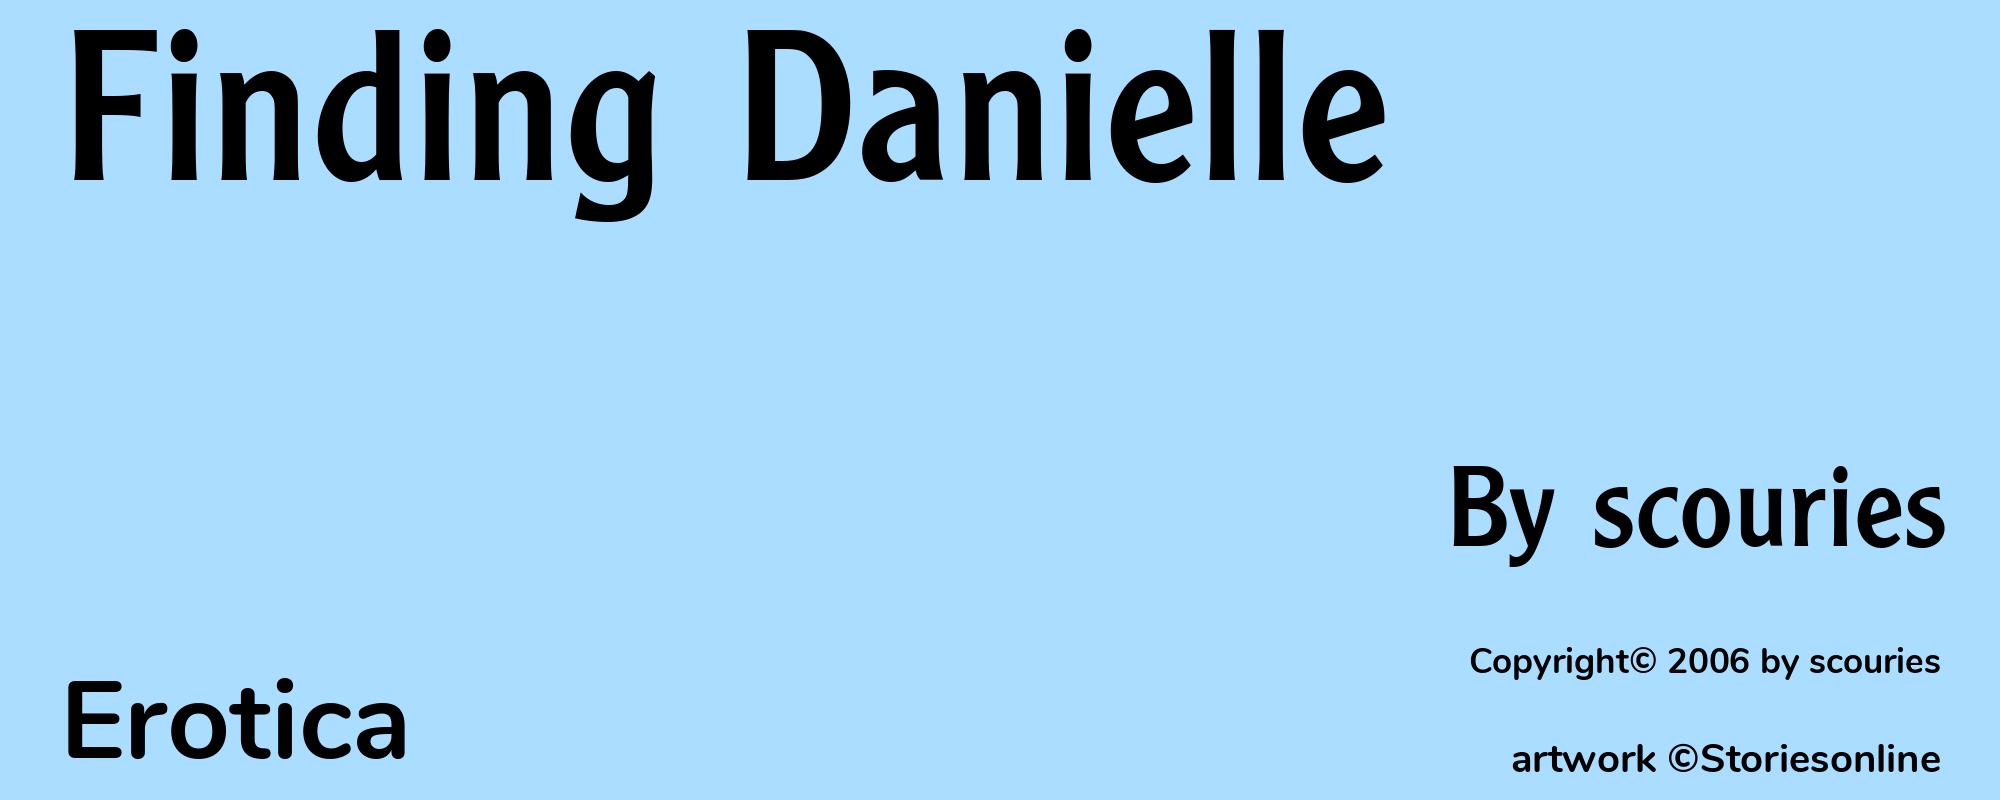 Finding Danielle - Cover